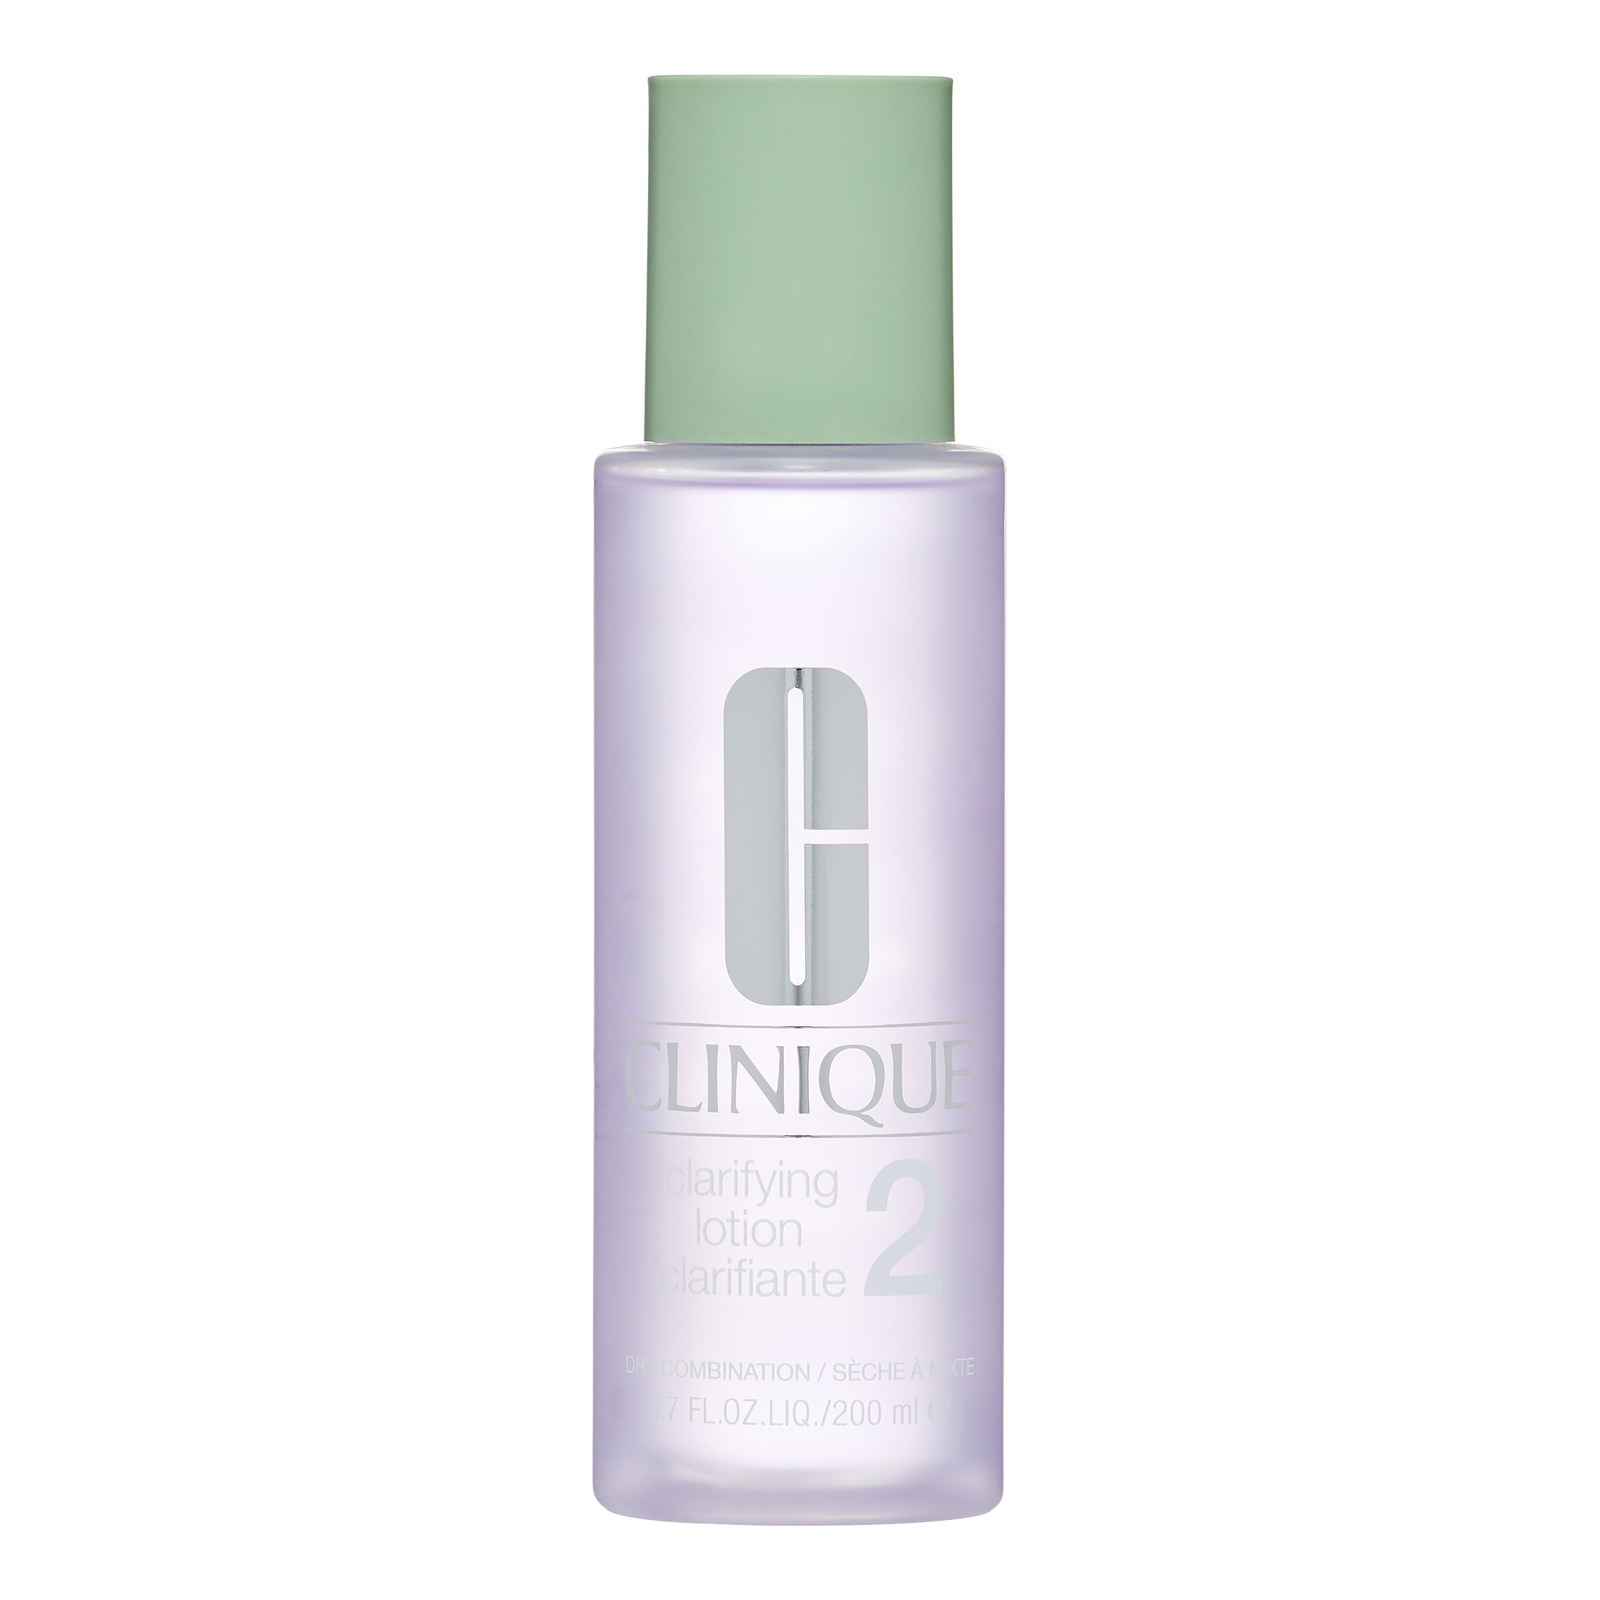 Clinique Branded Clarifying Toning Lotion 2 Bottle Dry Combination Skin - 6.7 Oz